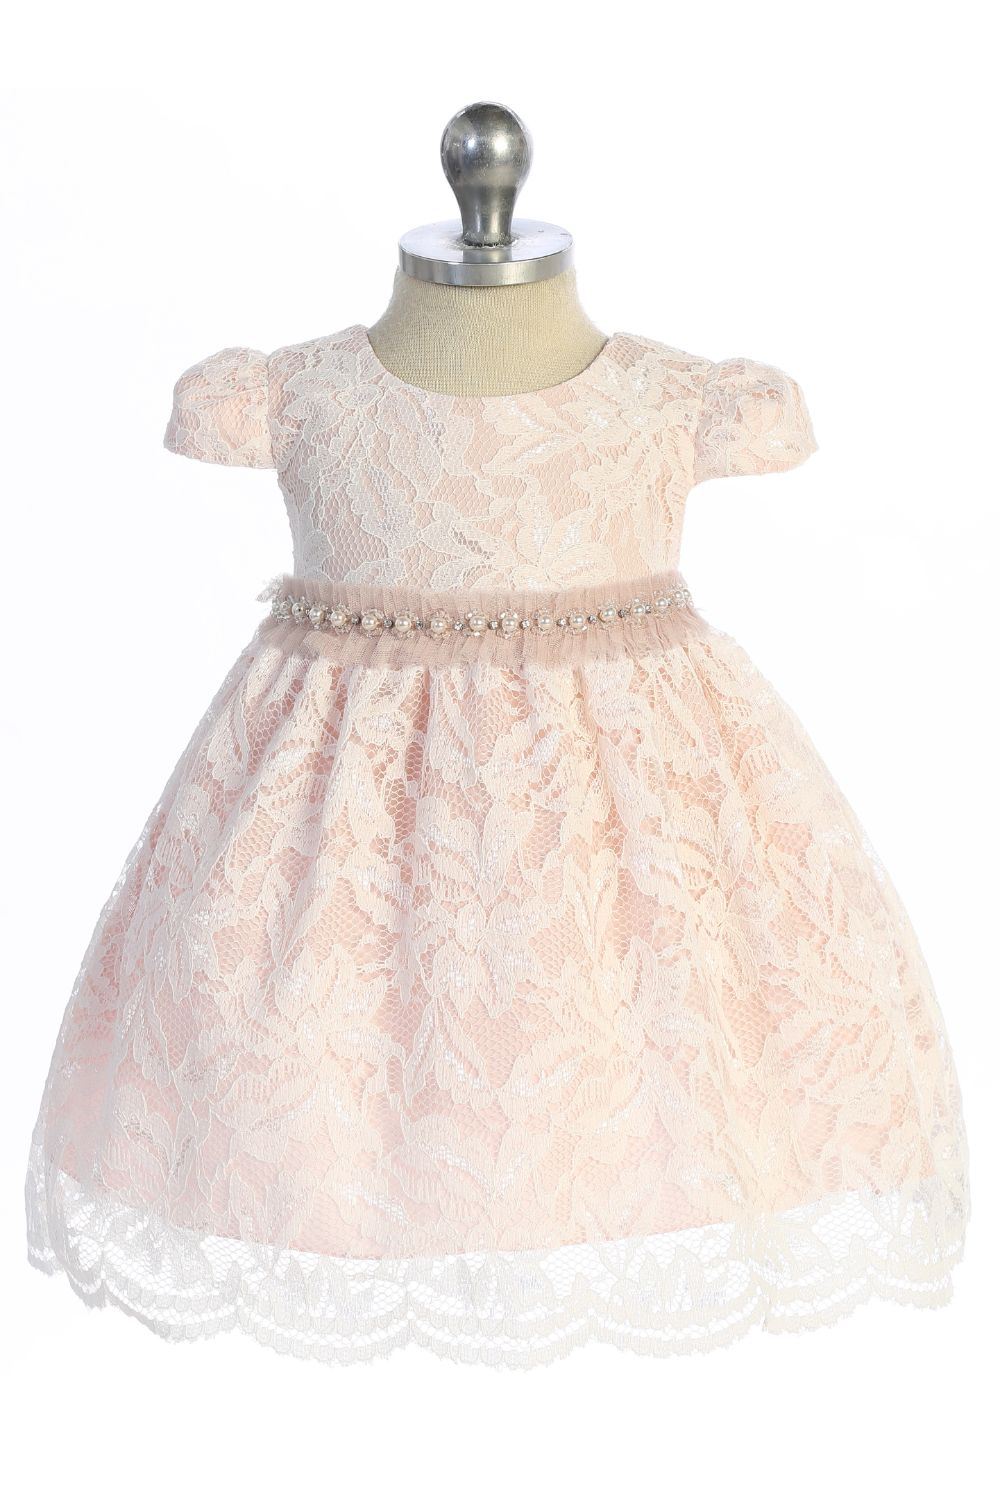 Lace V Back Bow Baby Dress w/ Mesh Pearl Trim